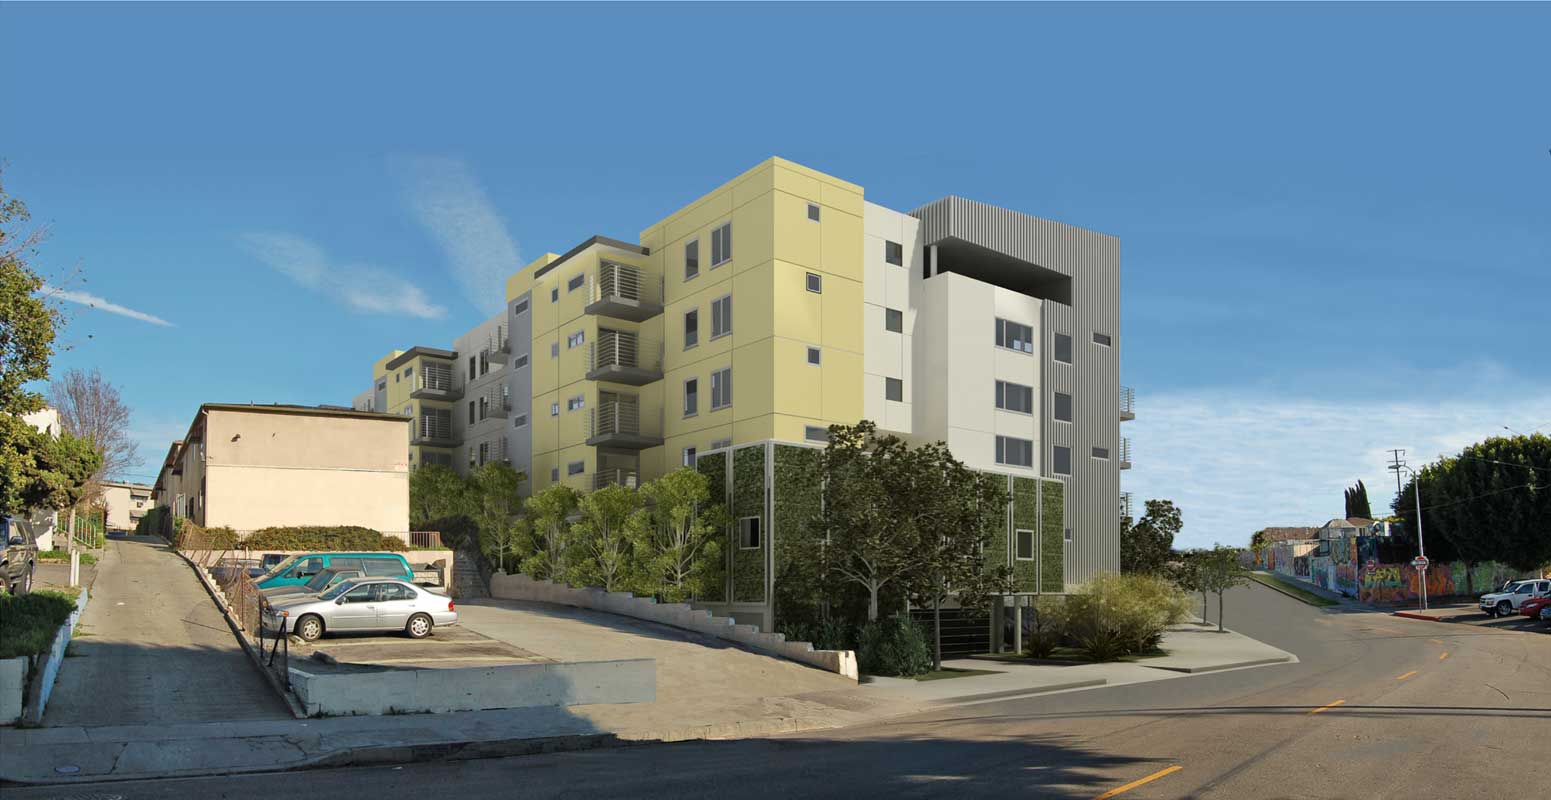 A rendering of the Glassell Park affordable housing complex. Image credit: Abode Communities